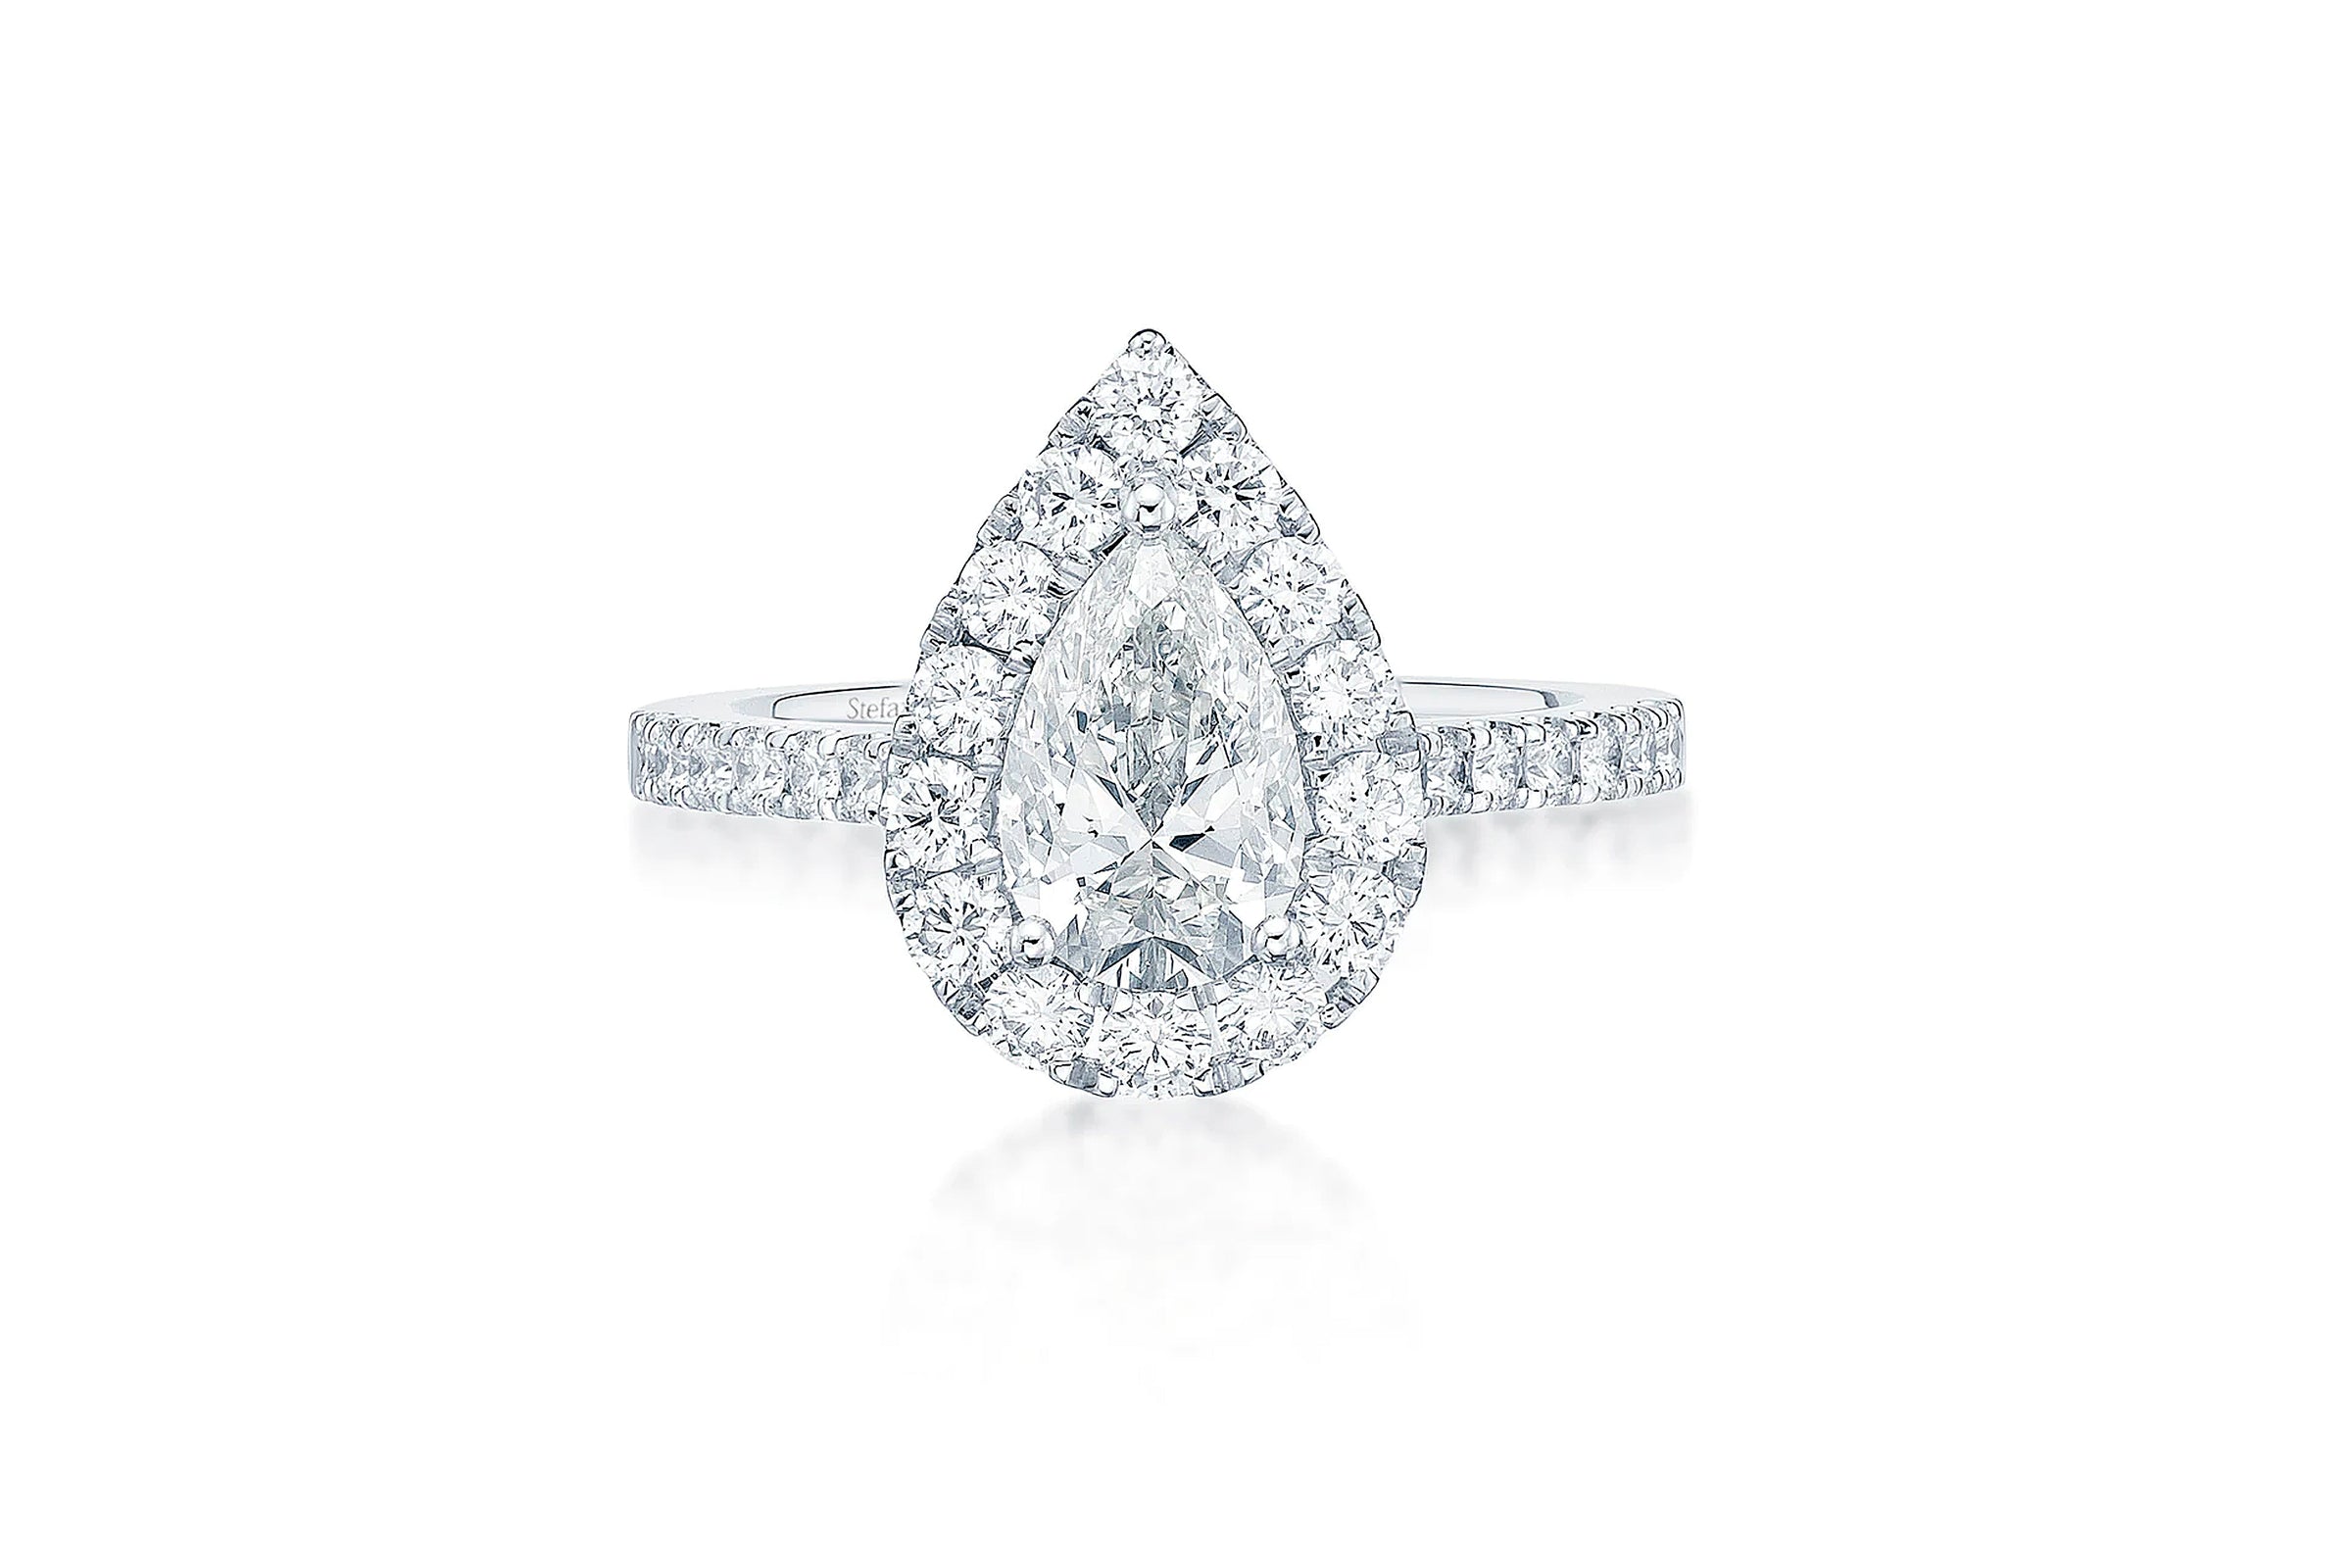 Pear Shaped Engagement Rings in Perth